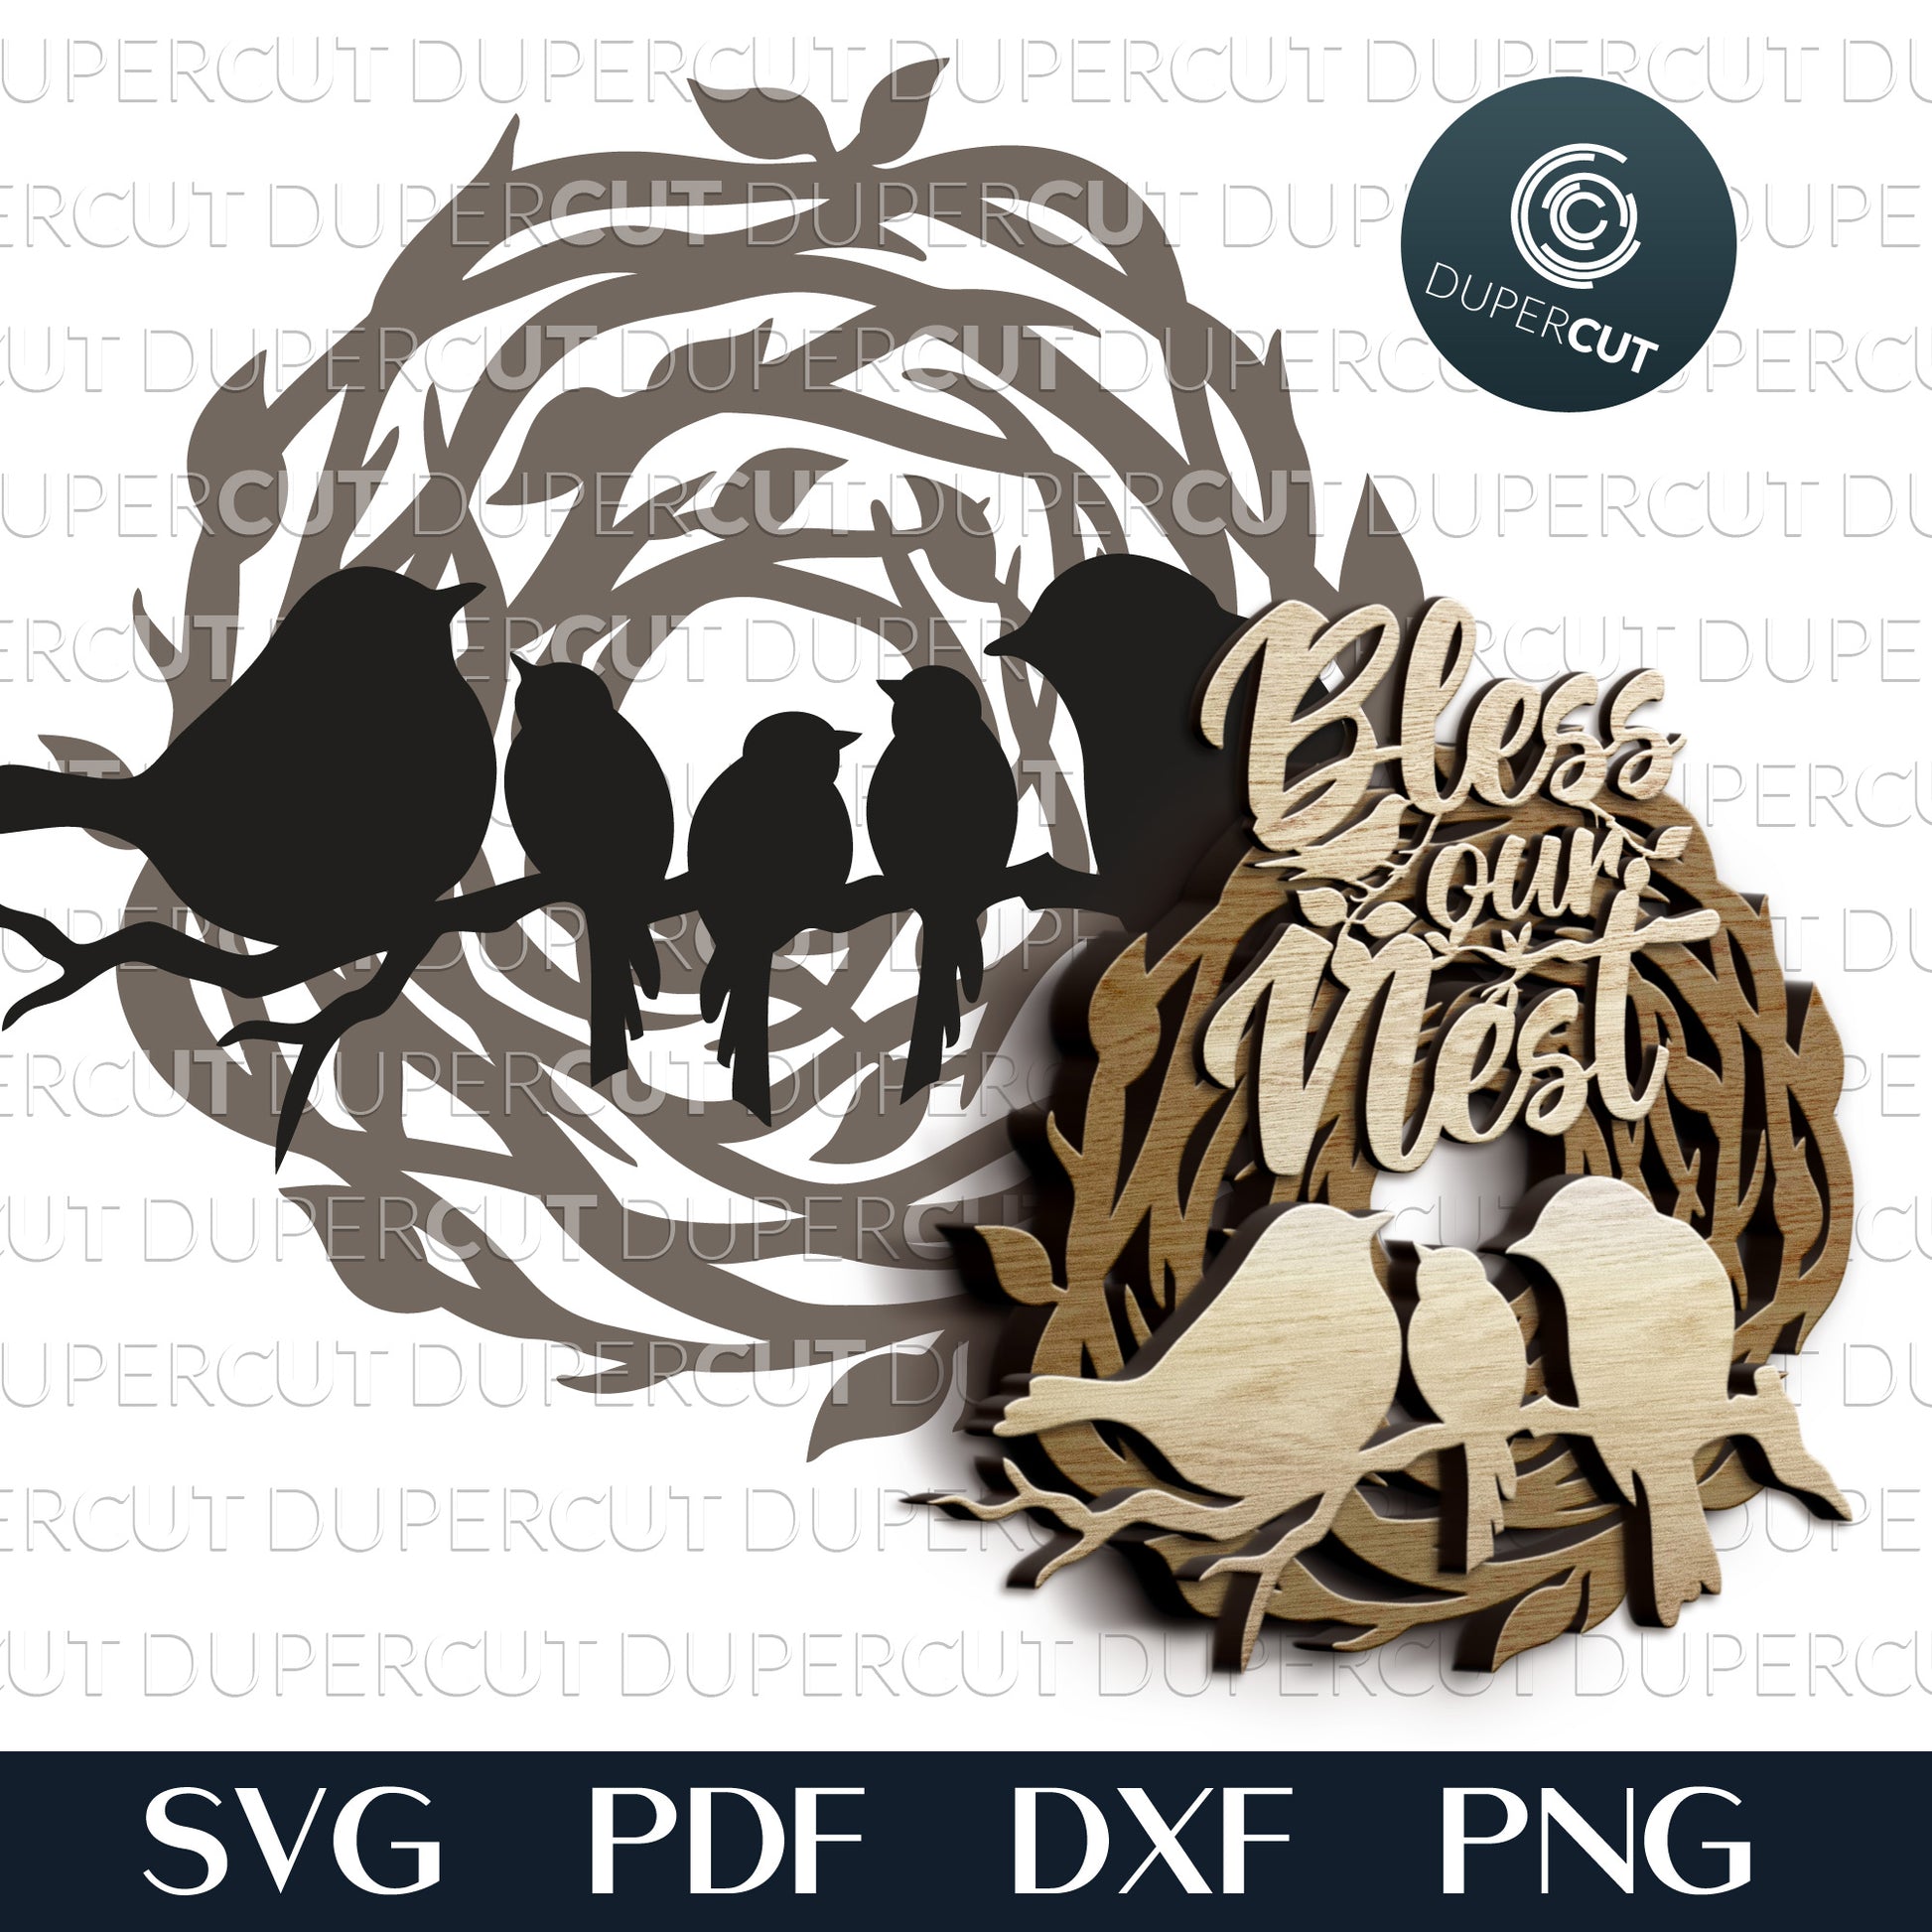 Bless our Nest  sign, birds family layered template. SVG PDF DXF files for laser cutting, engraving, Cricut, Silhouette Cameo, Glowforge, CNC Plasma machines by DuperCut